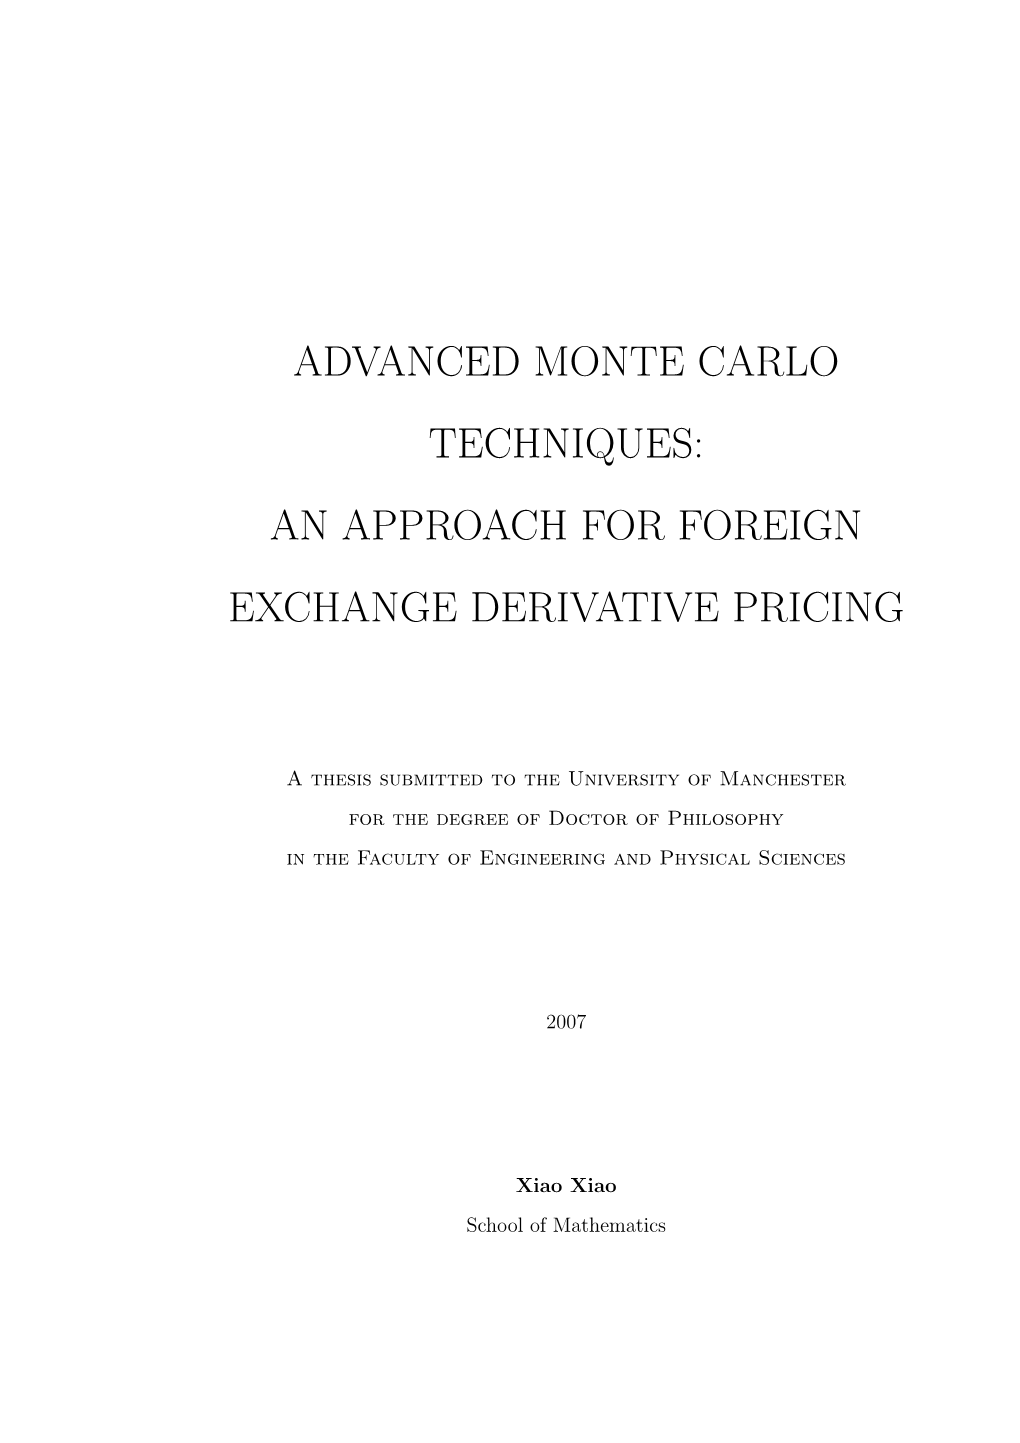 Advanced Monte Carlo Techniques: an Approach for Foreign Exchange Derivative Pricing